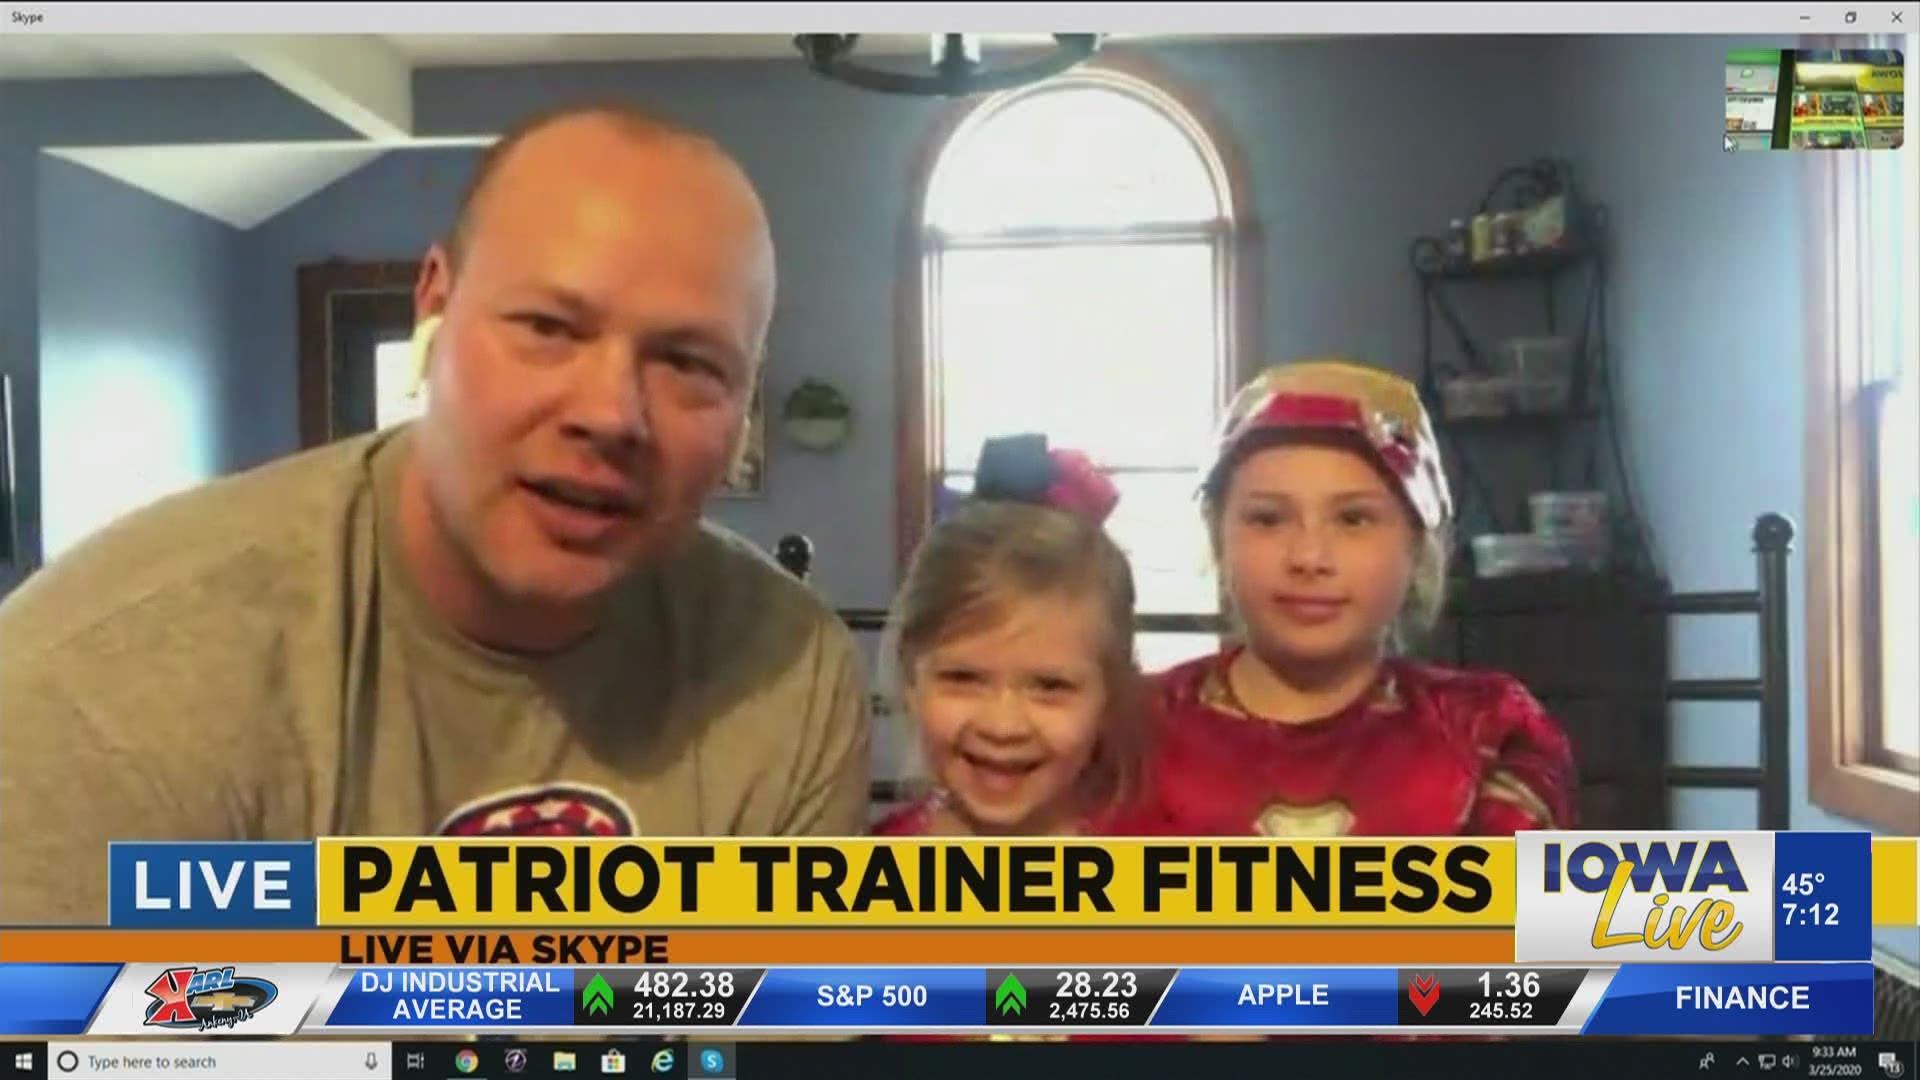 Patriot Trainer Fitness shows us a superhero theme workout for kids to do at home